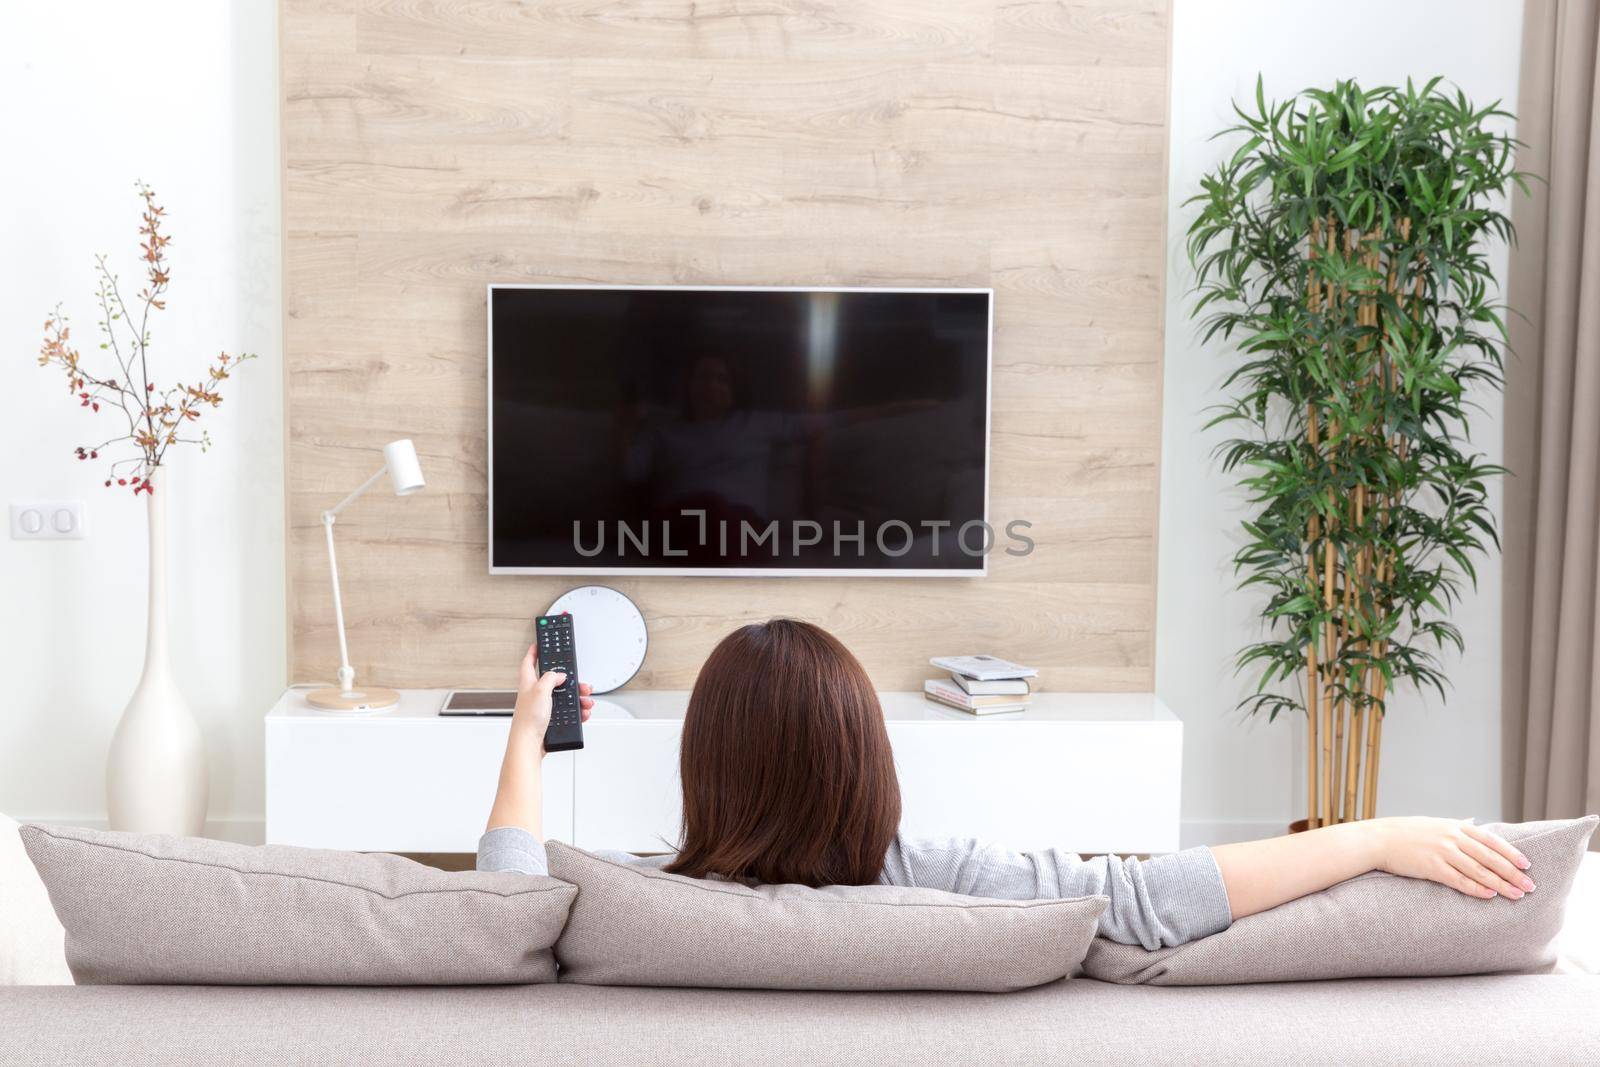 Young woman watching TV in the room by Mariakray